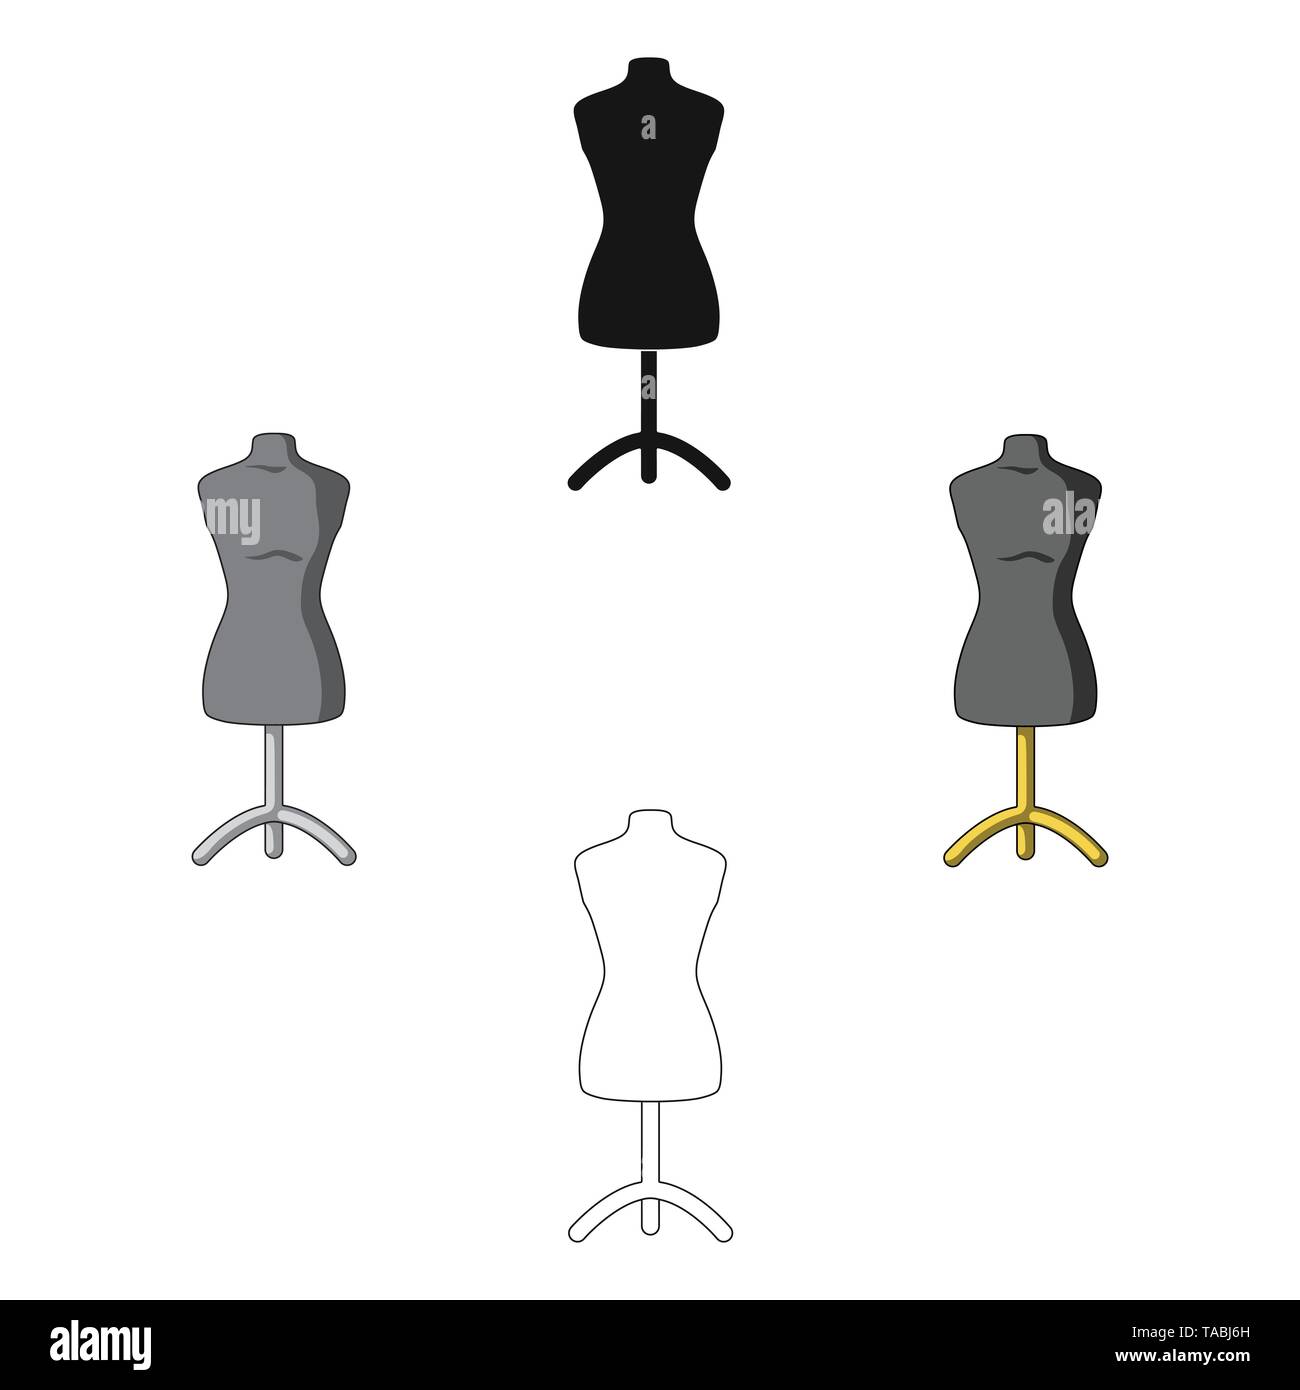 Cloth, clothing, dress, fashion, mannequin, sewing, tailor icon